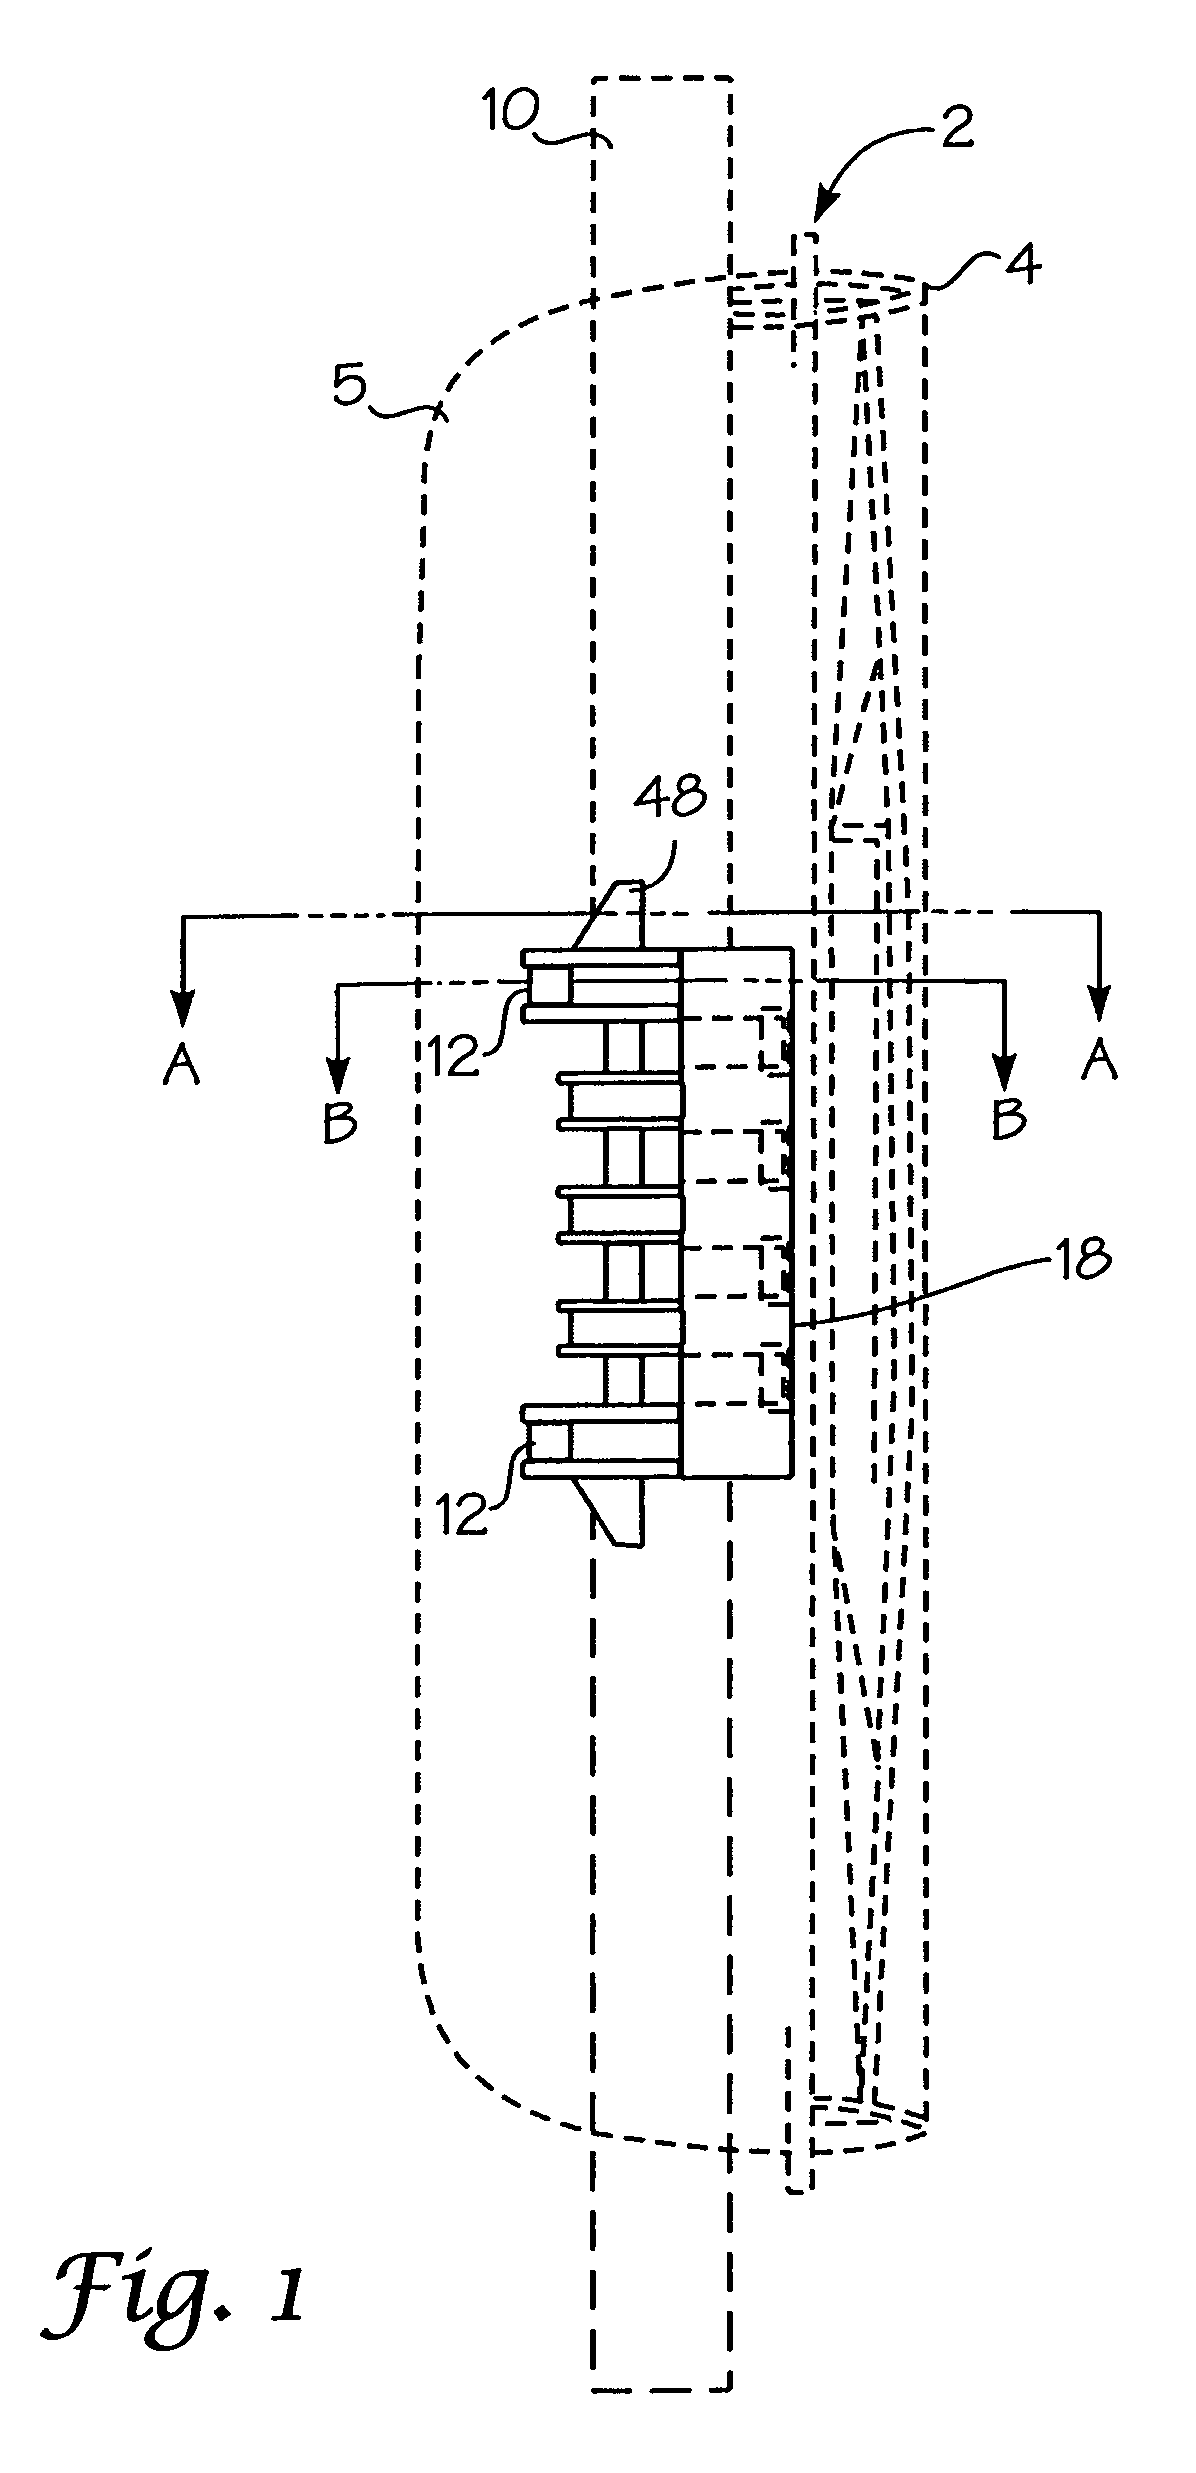 Rearview mirror assembly for motor vehicles